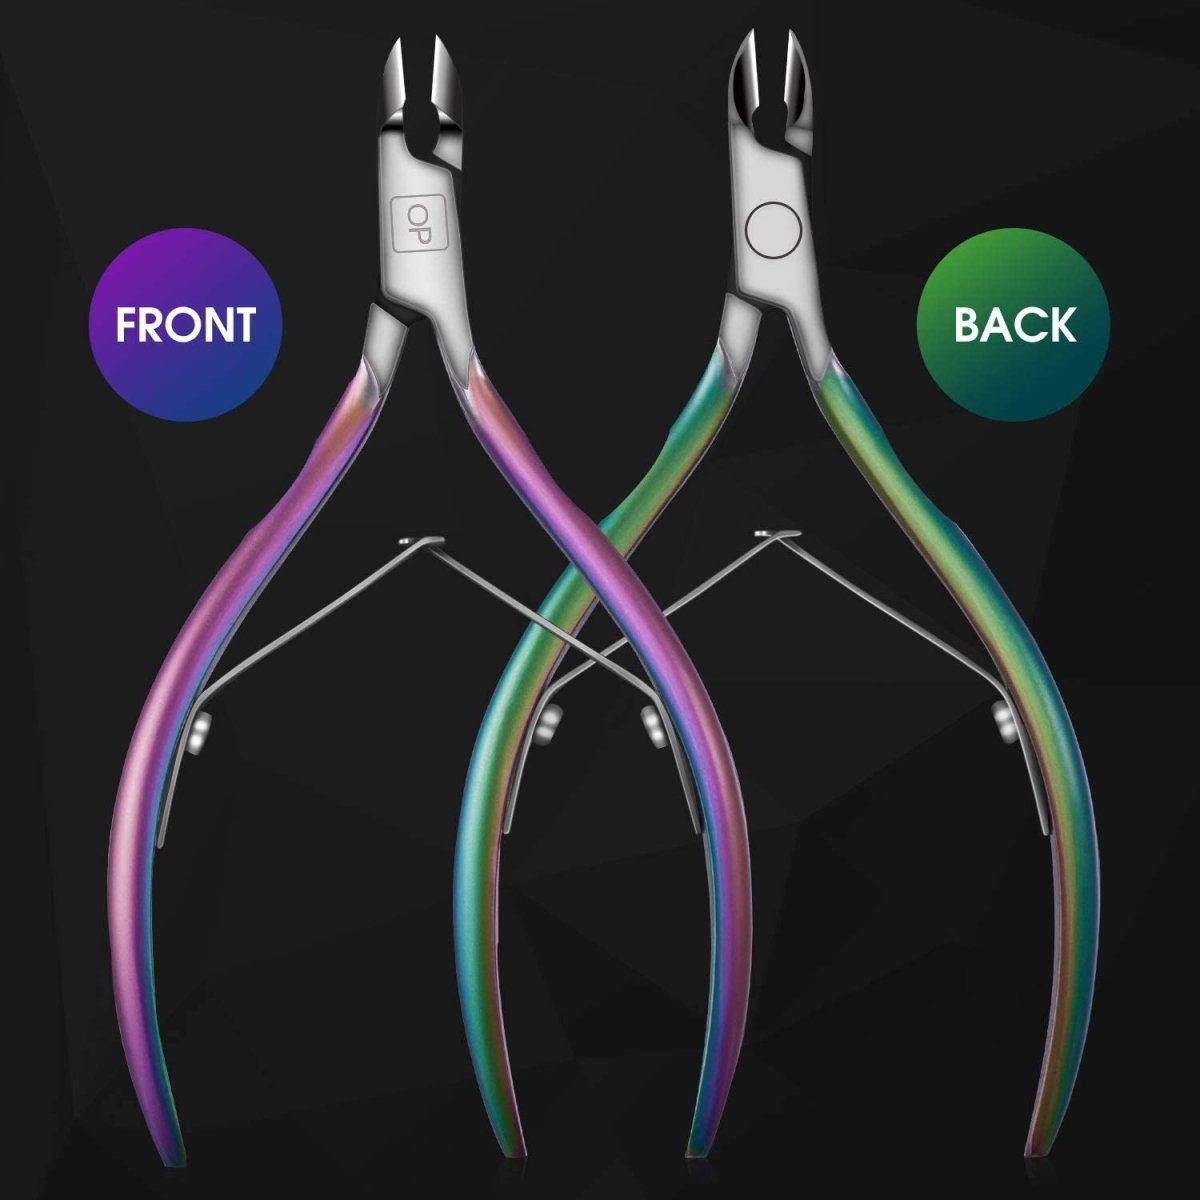 Cuticle Trimmer Cuticle Nippers Clippers Stainless Steel Hangnail Remover Extremely Sharp Cutter Pedicure Manicure Tool, X7 Rainbow Gradient - Shiny Nails